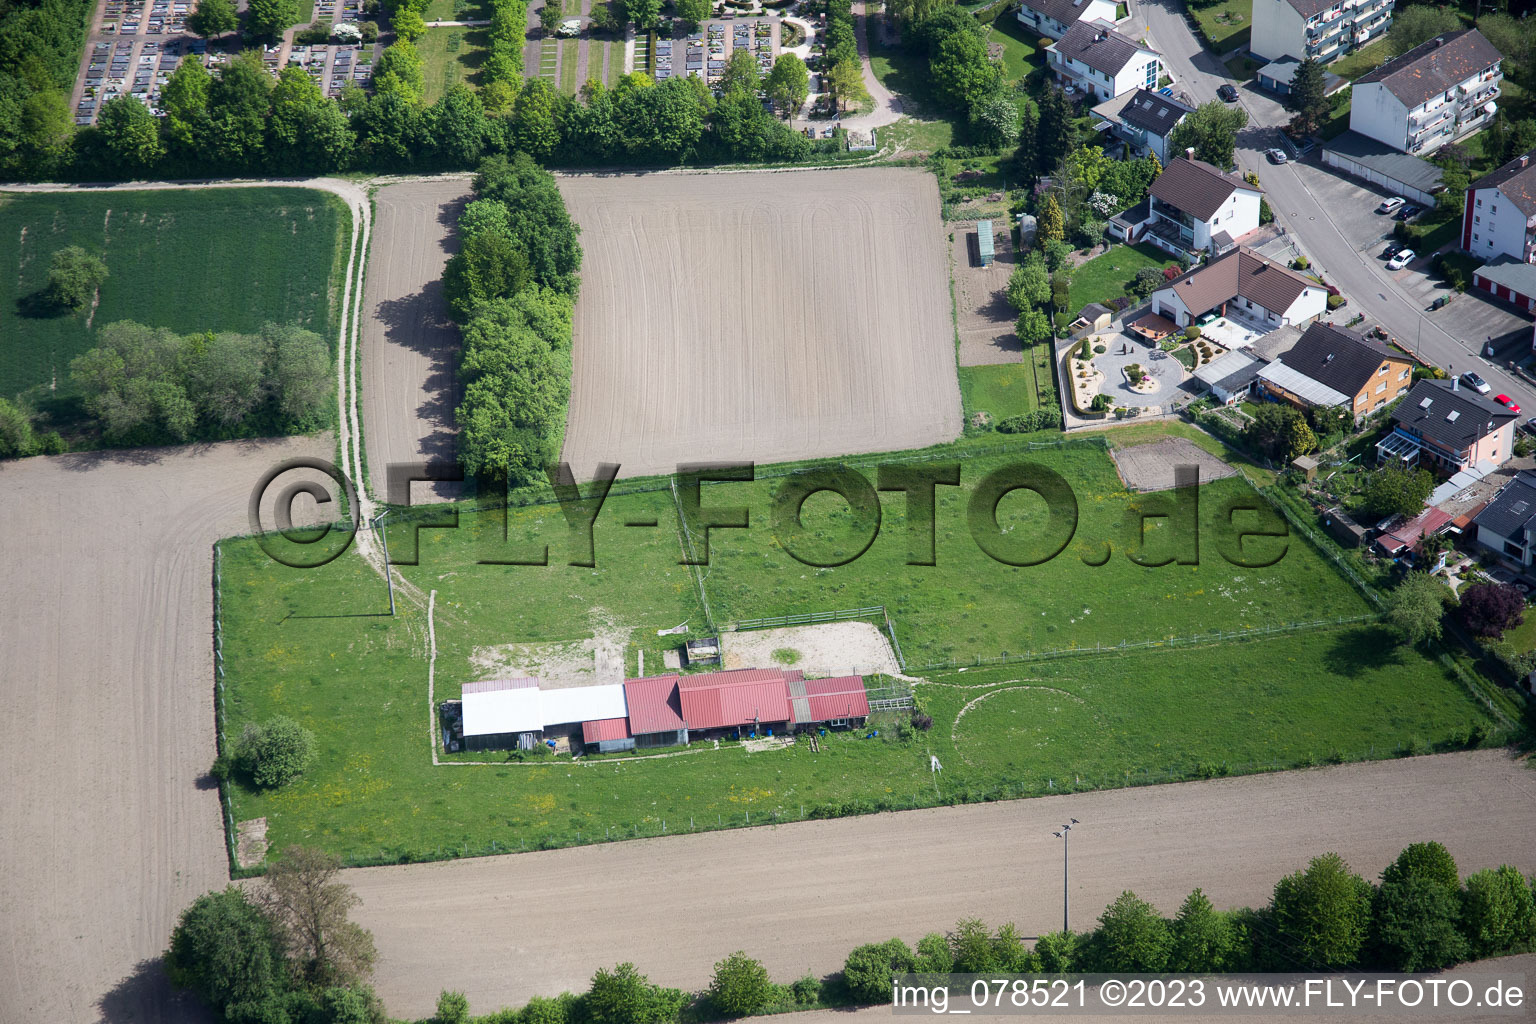 Aerial photograpy of Hagenbach in the state Rhineland-Palatinate, Germany